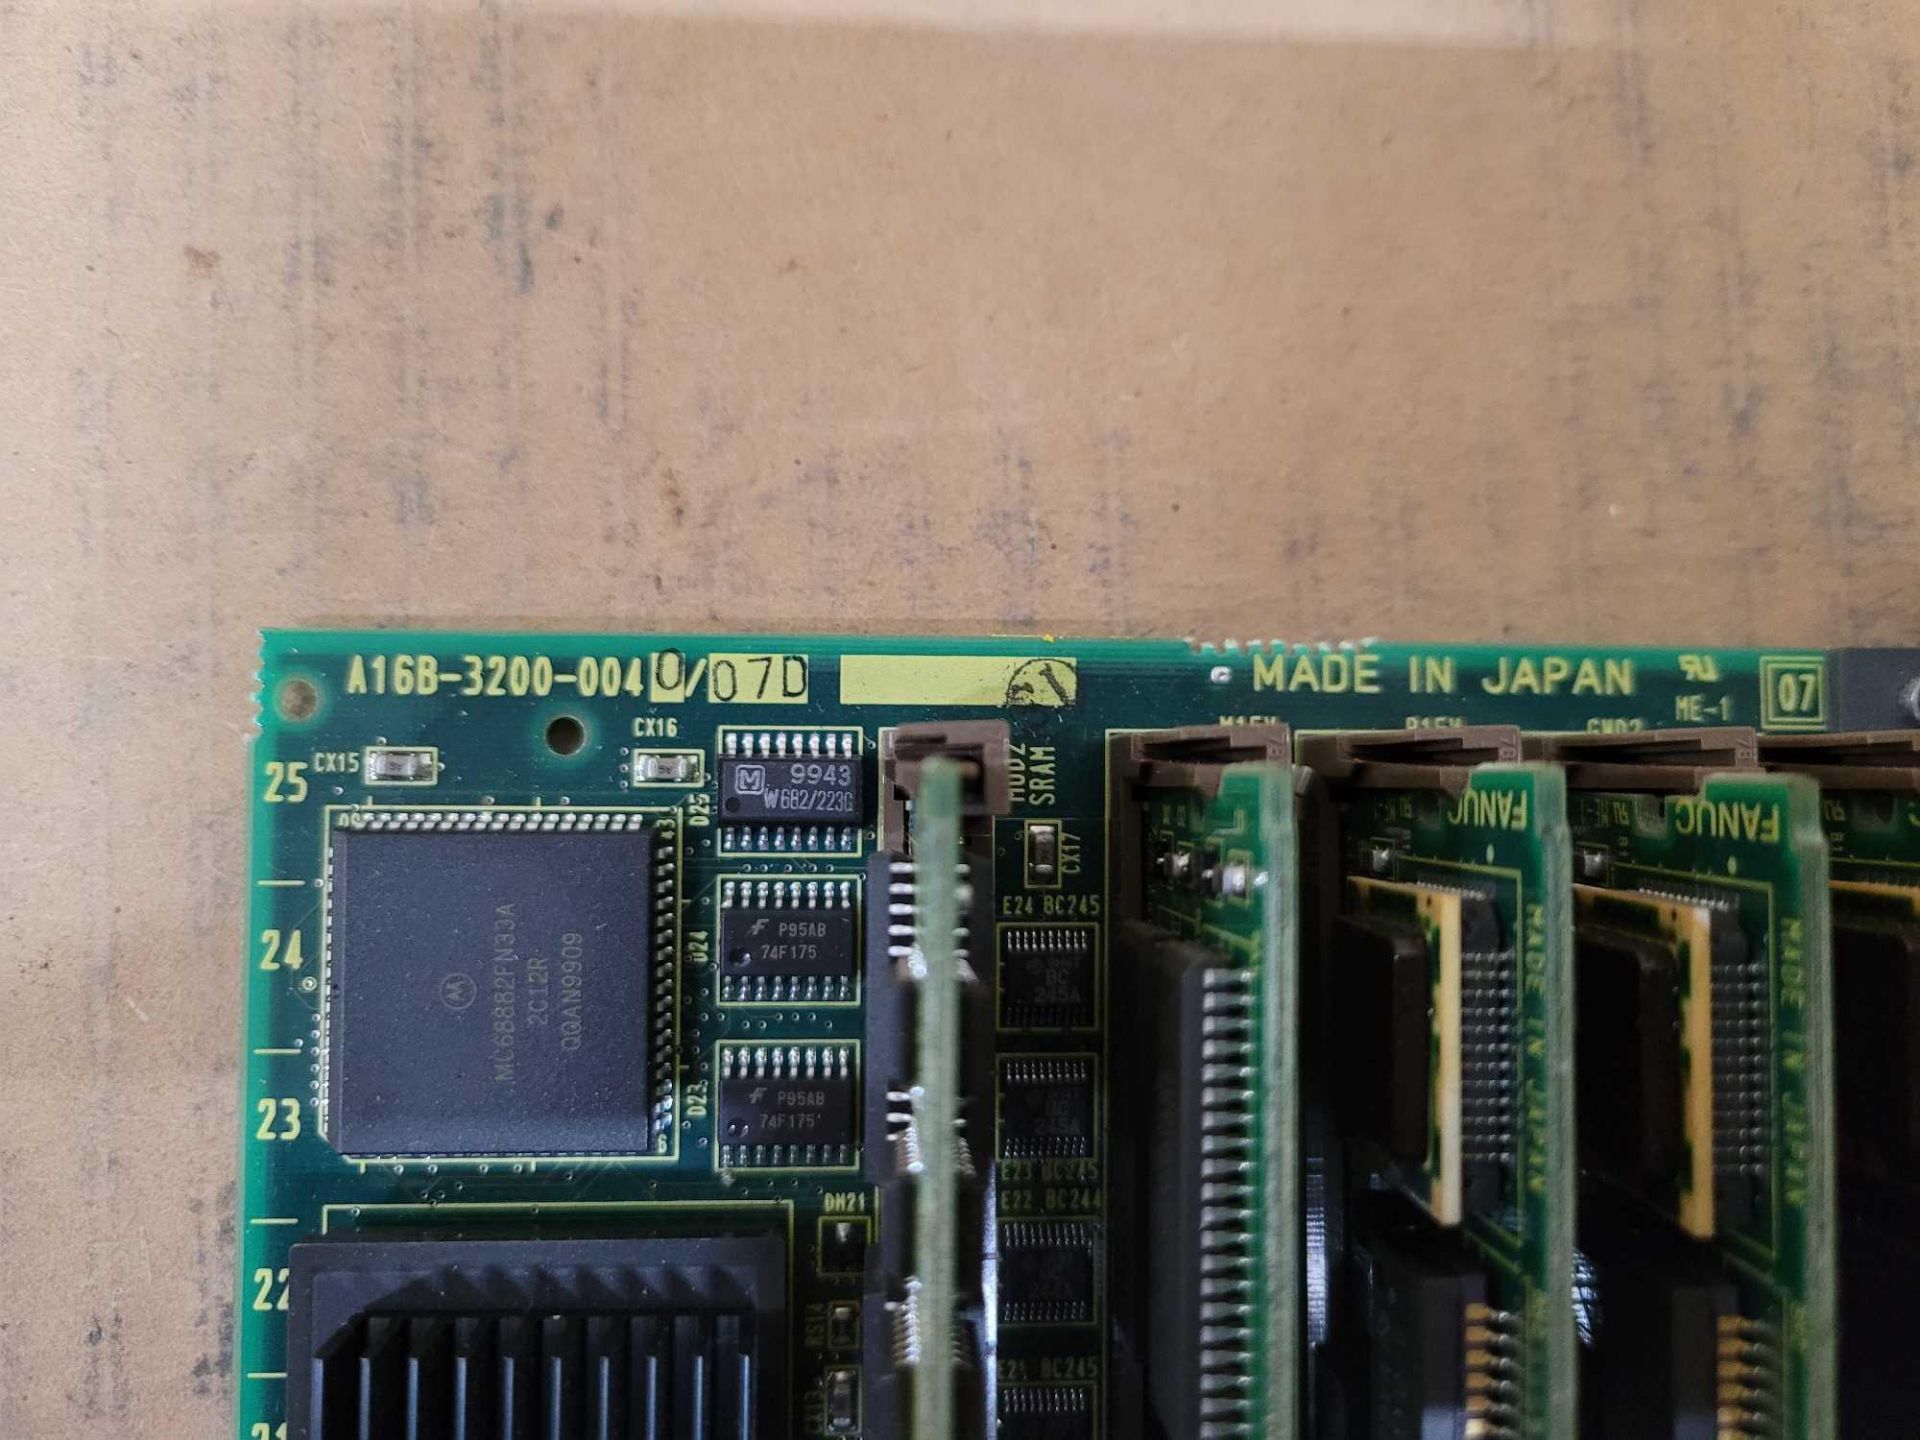 FANUC A16B-3200-0040/07D CPU PCB W/ DAUGHTER BOARDS [1] A20B-2902-037 [1] A20B-2902-0530/01A [3] A20 - Image 3 of 7